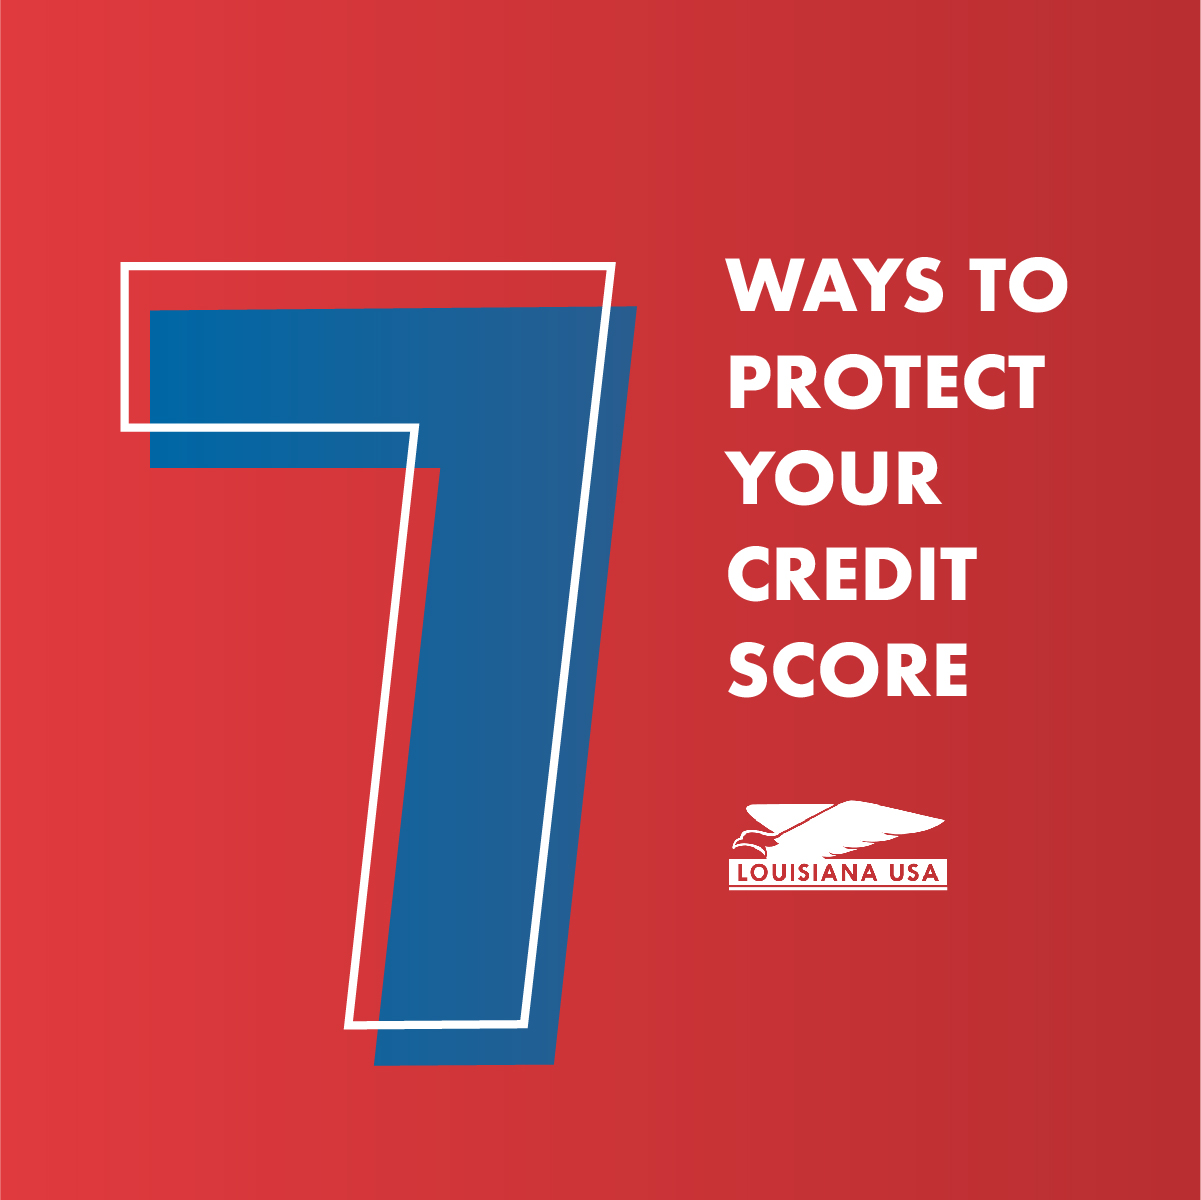 Protect Your Credit Score